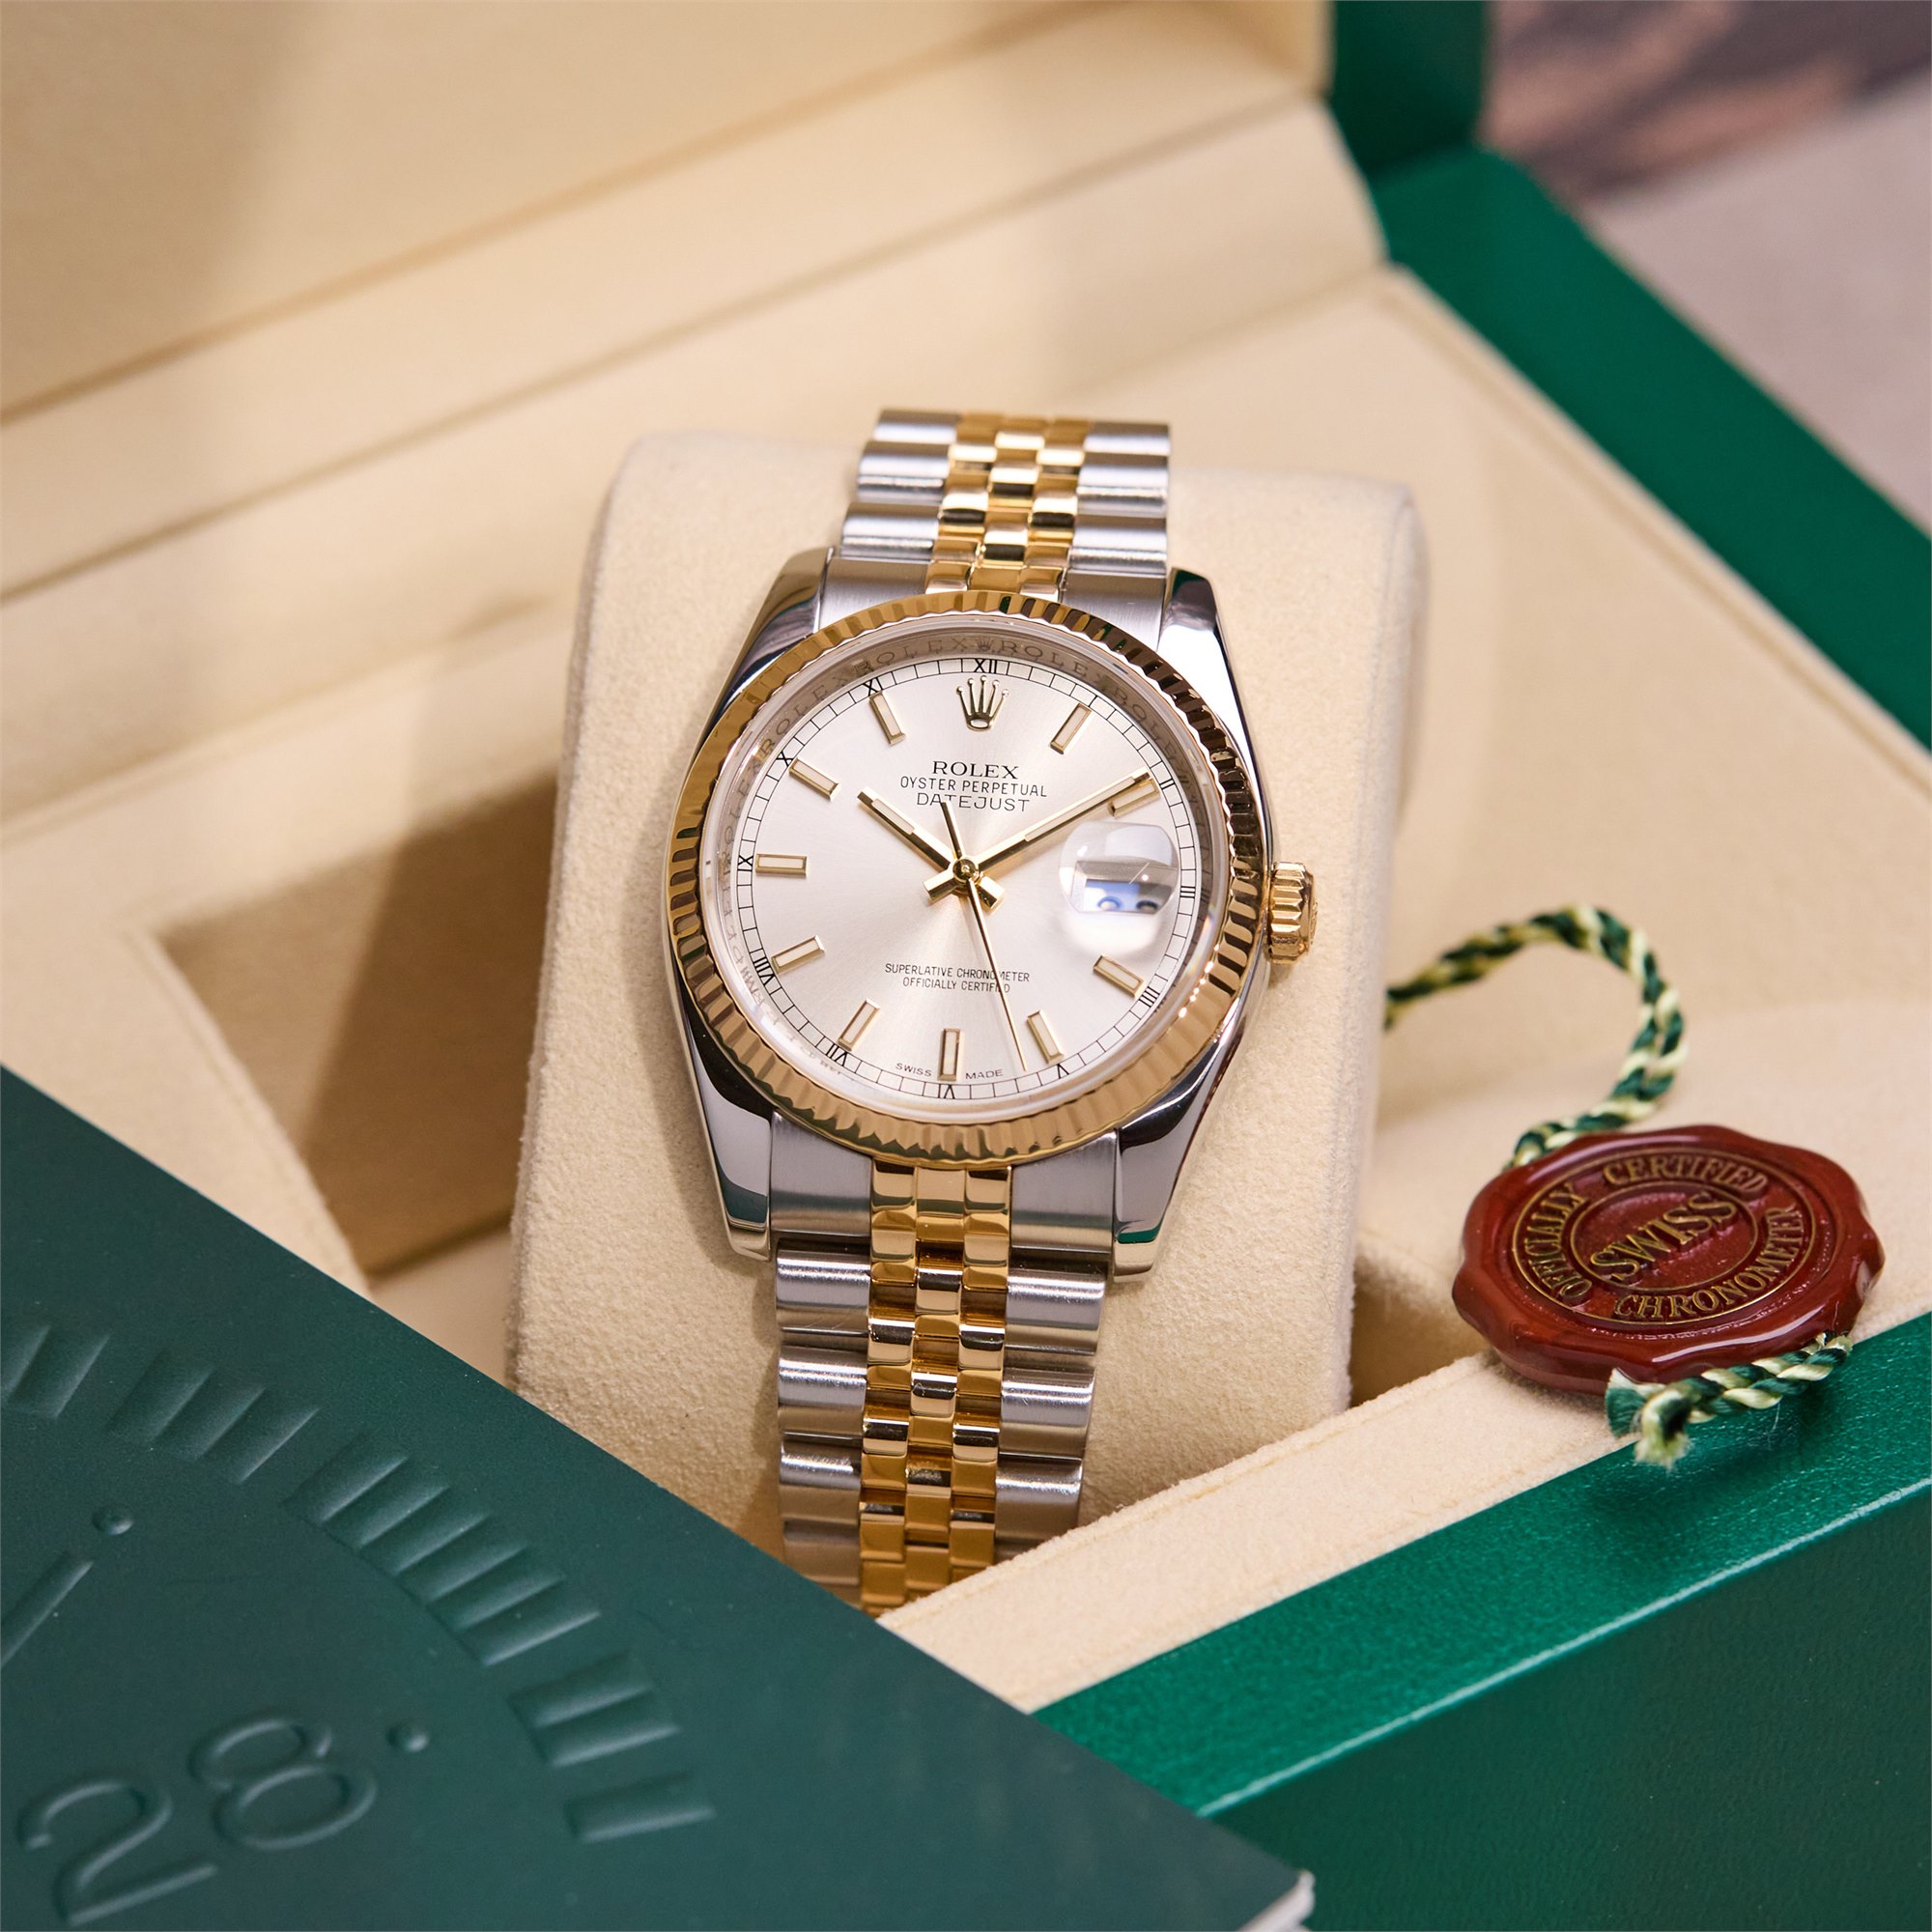 Rolex Datejust 36 Yellow Gold & Stainless Steel 116233